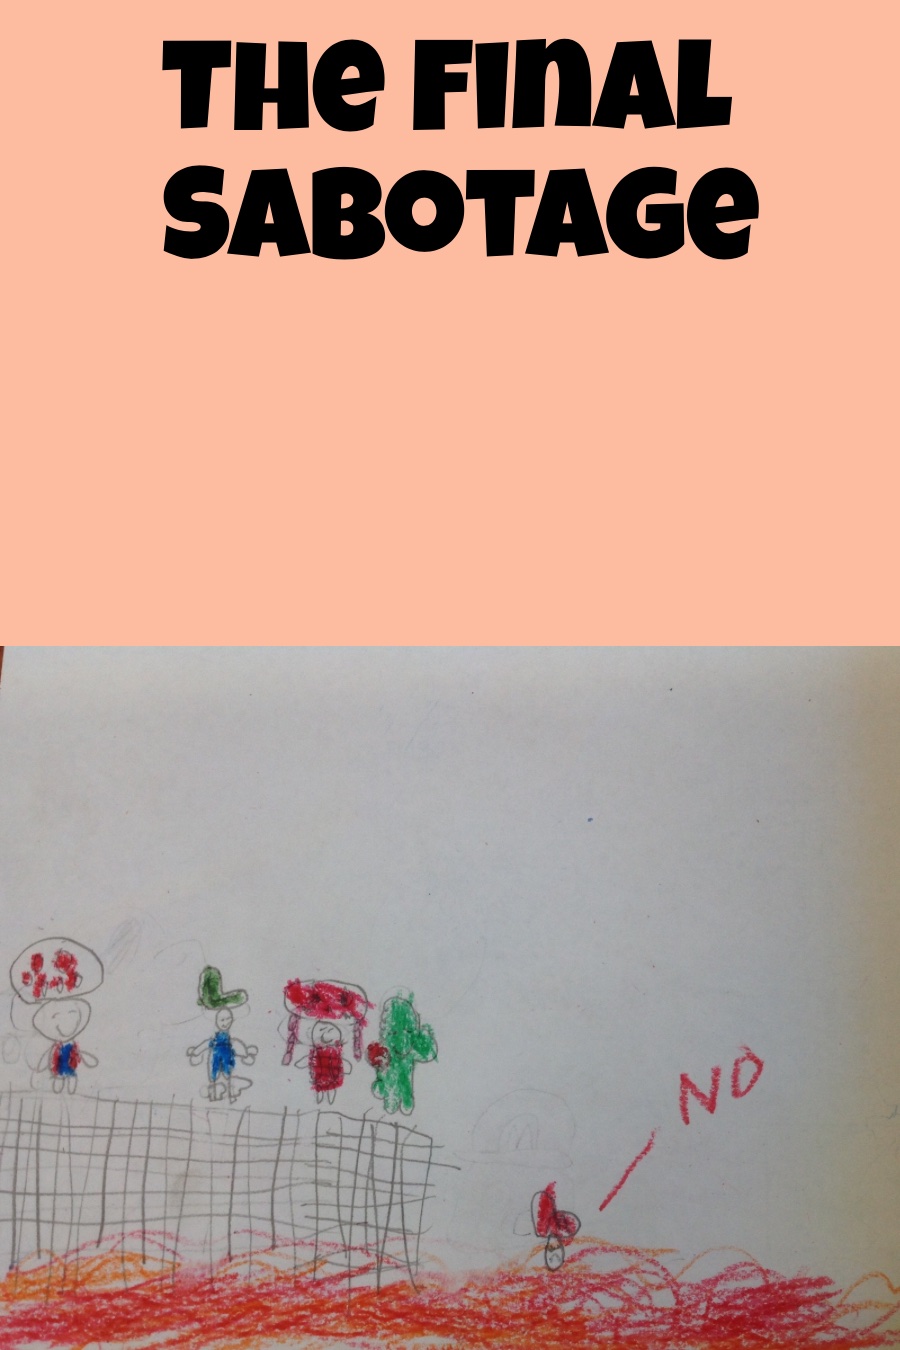 The Final Sabotage by Troy C